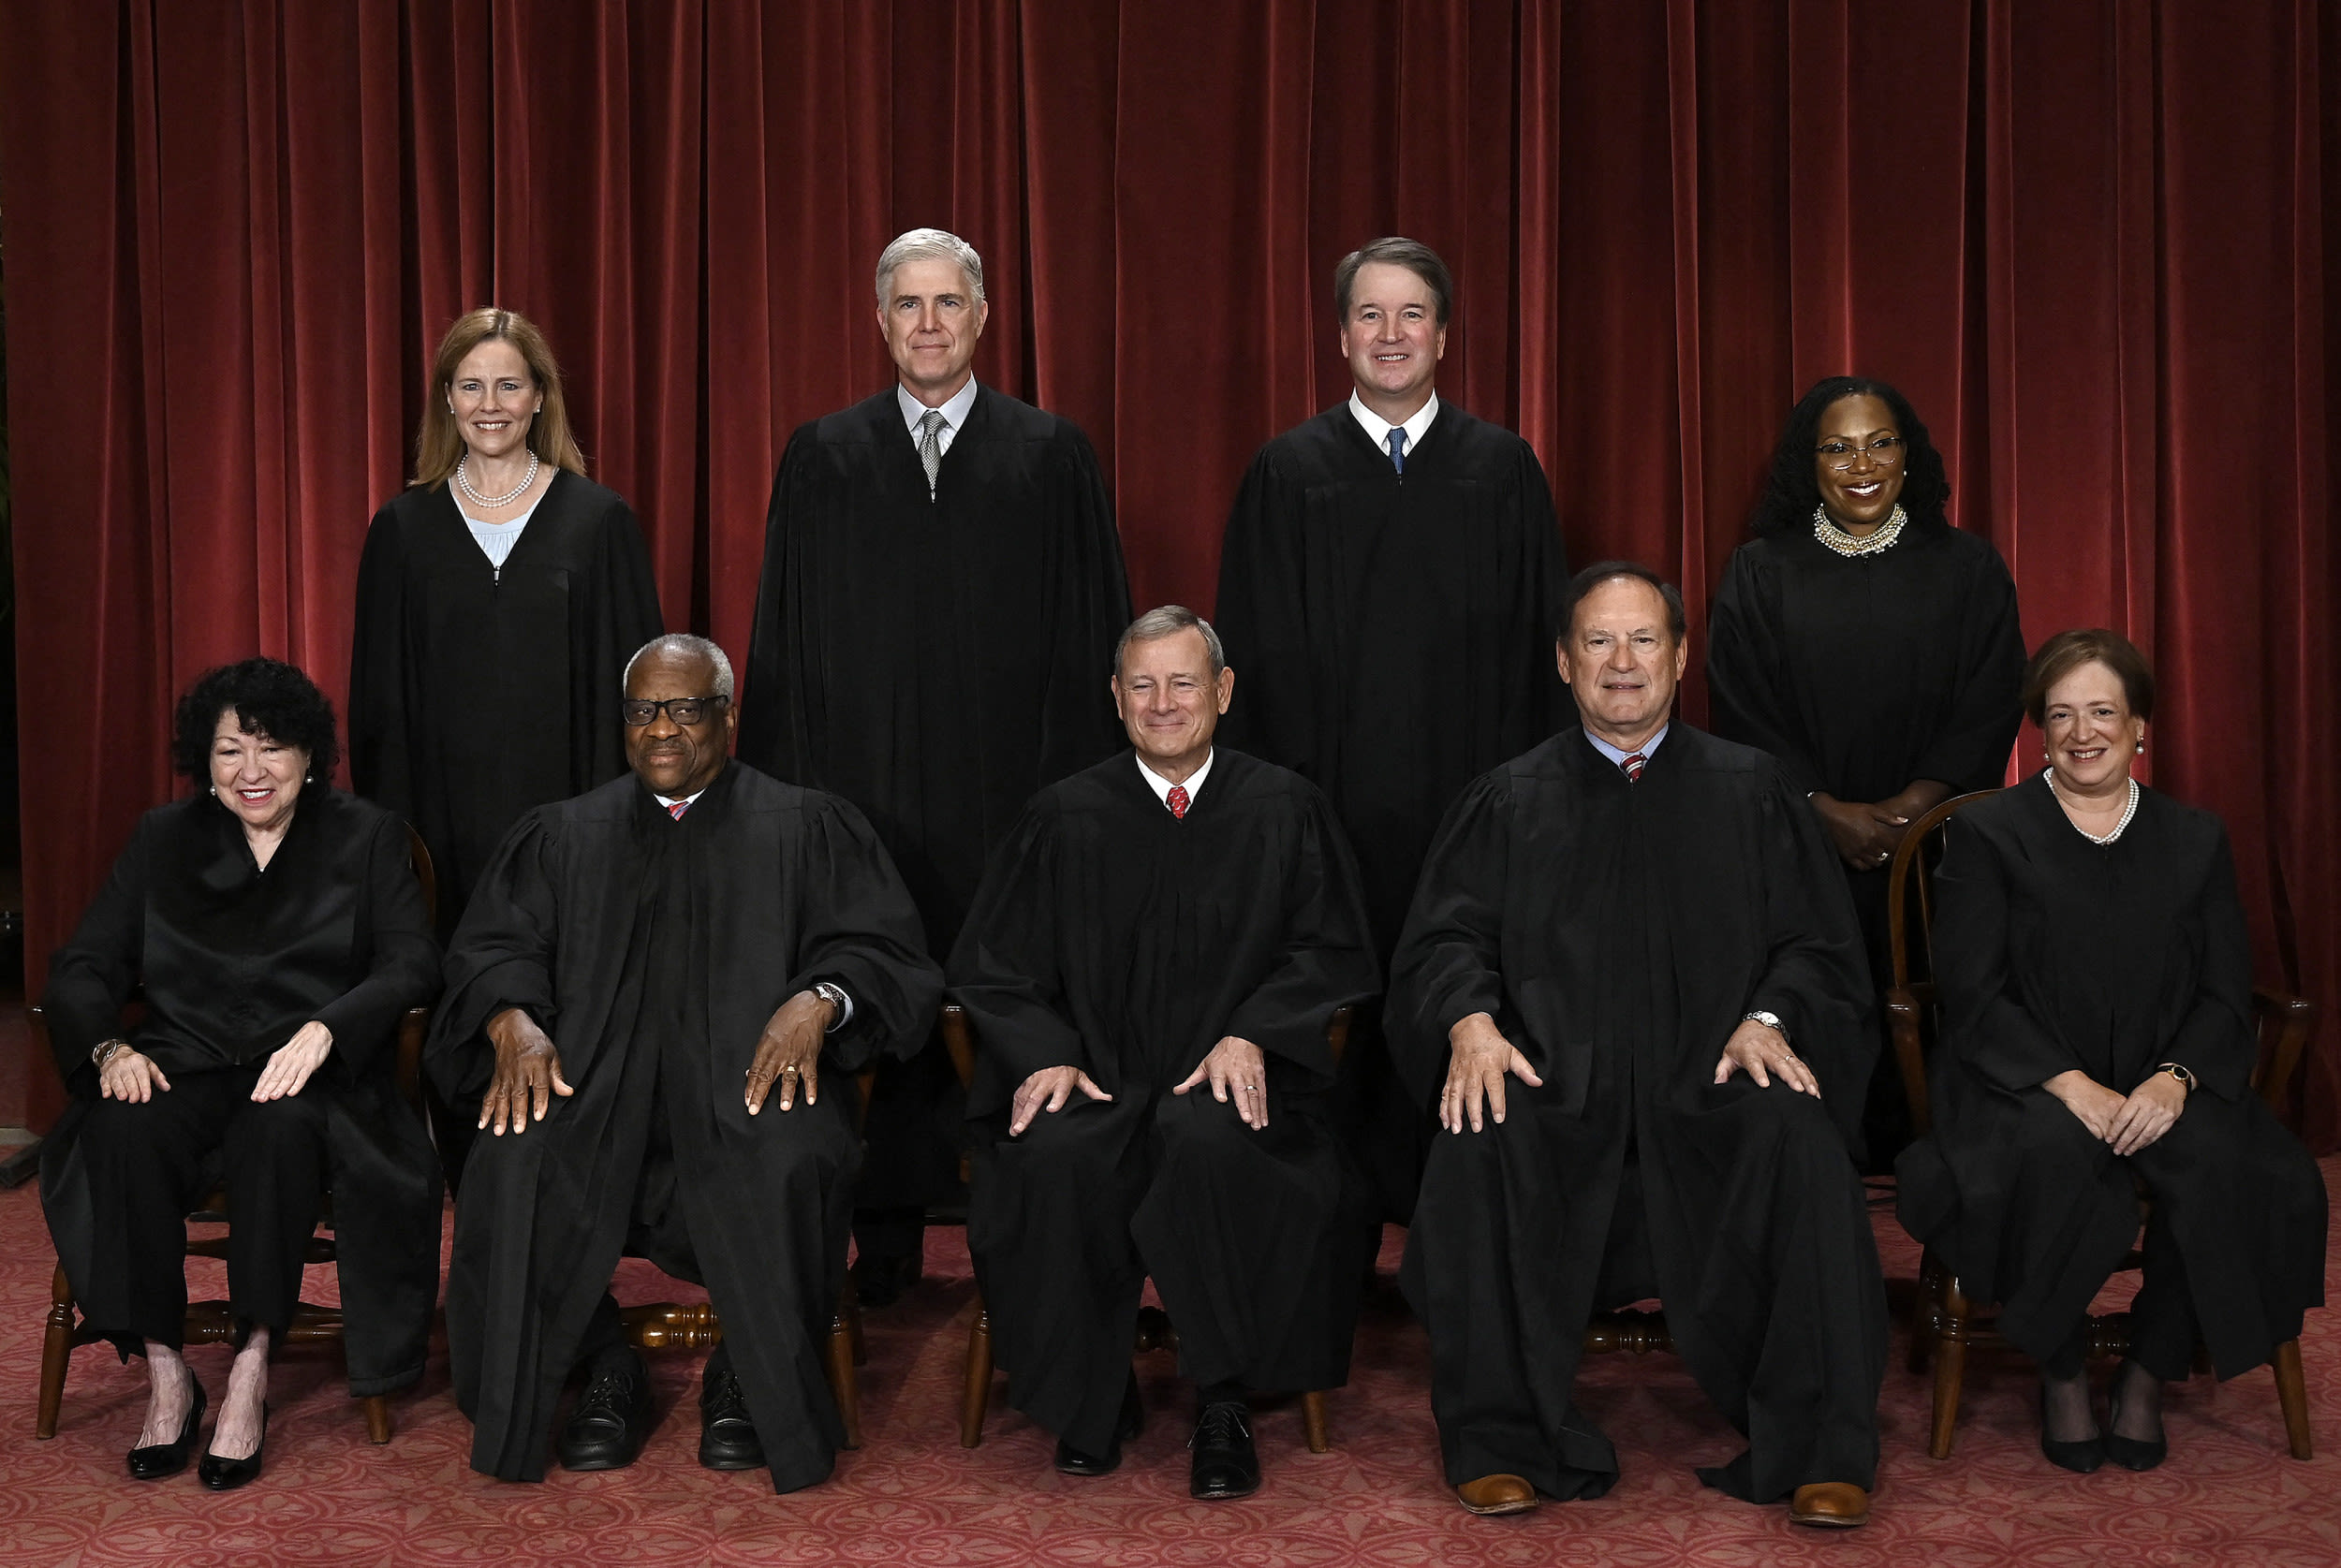 Only one Supreme Court justice has decided every case this year